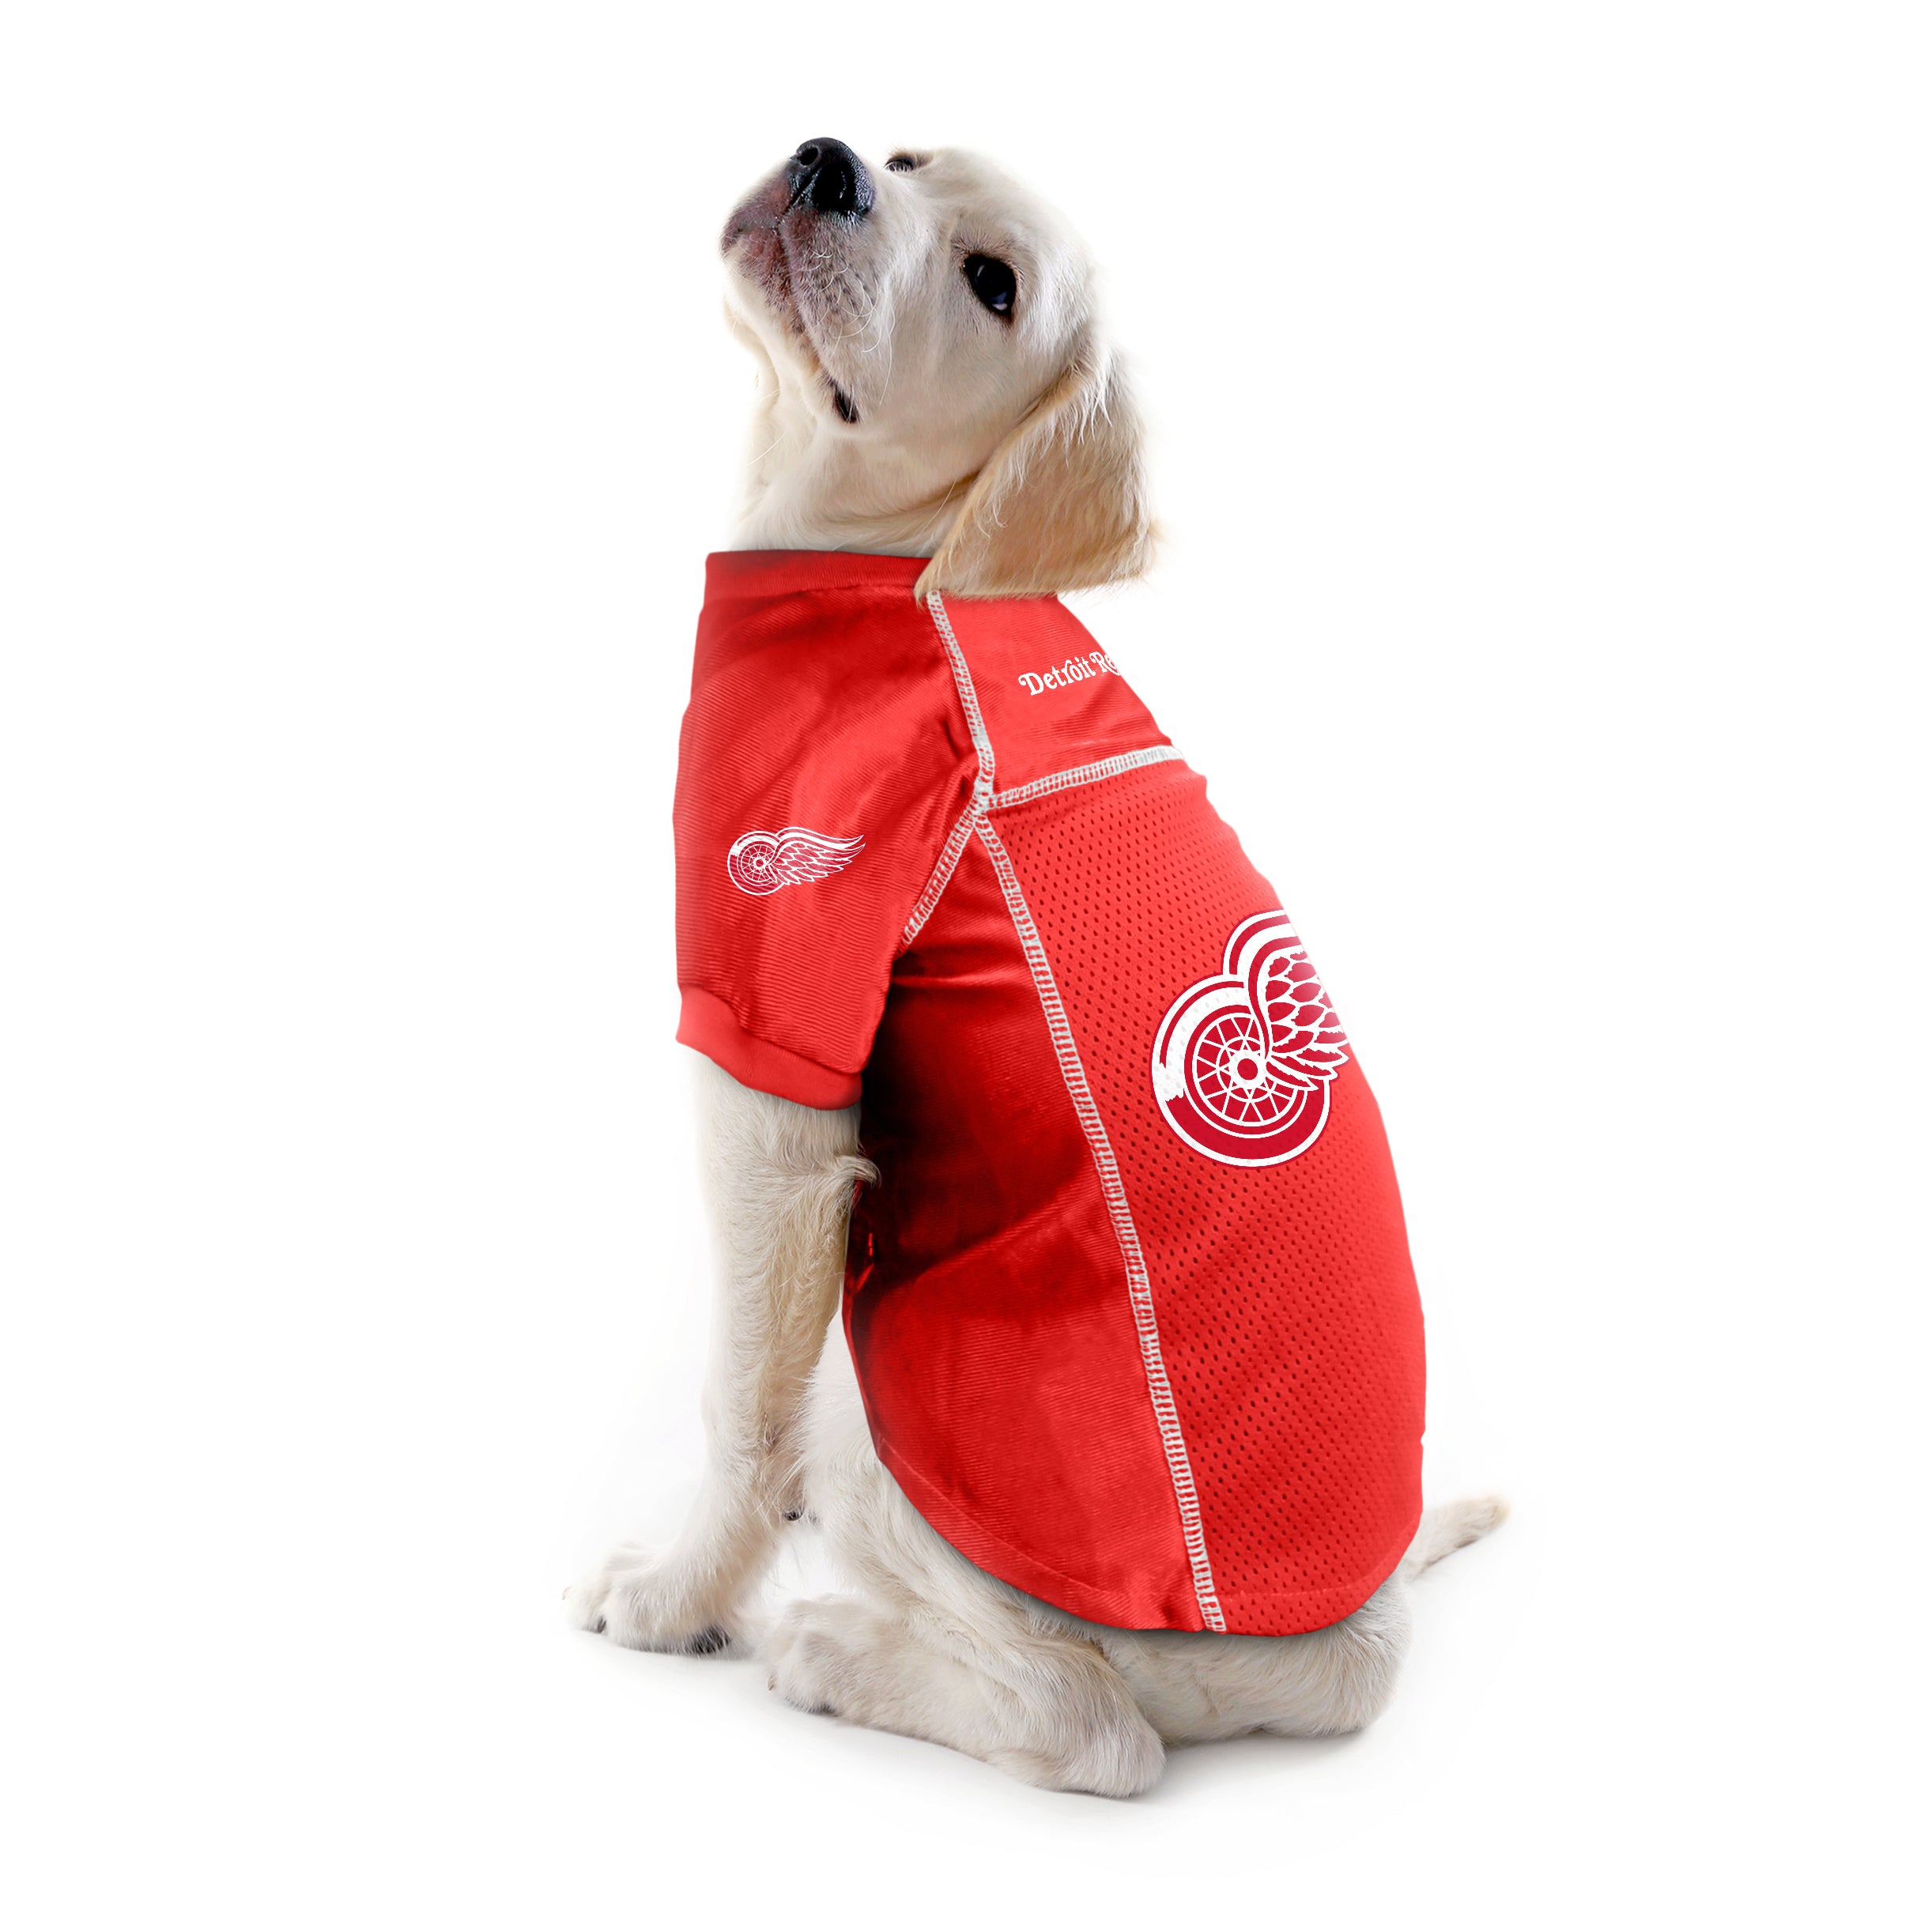  Littlearth Unisex-Adult NHL Detroit Red Wings Performance Pet  T-Shirt, Team Color, X-Small : Sports & Outdoors